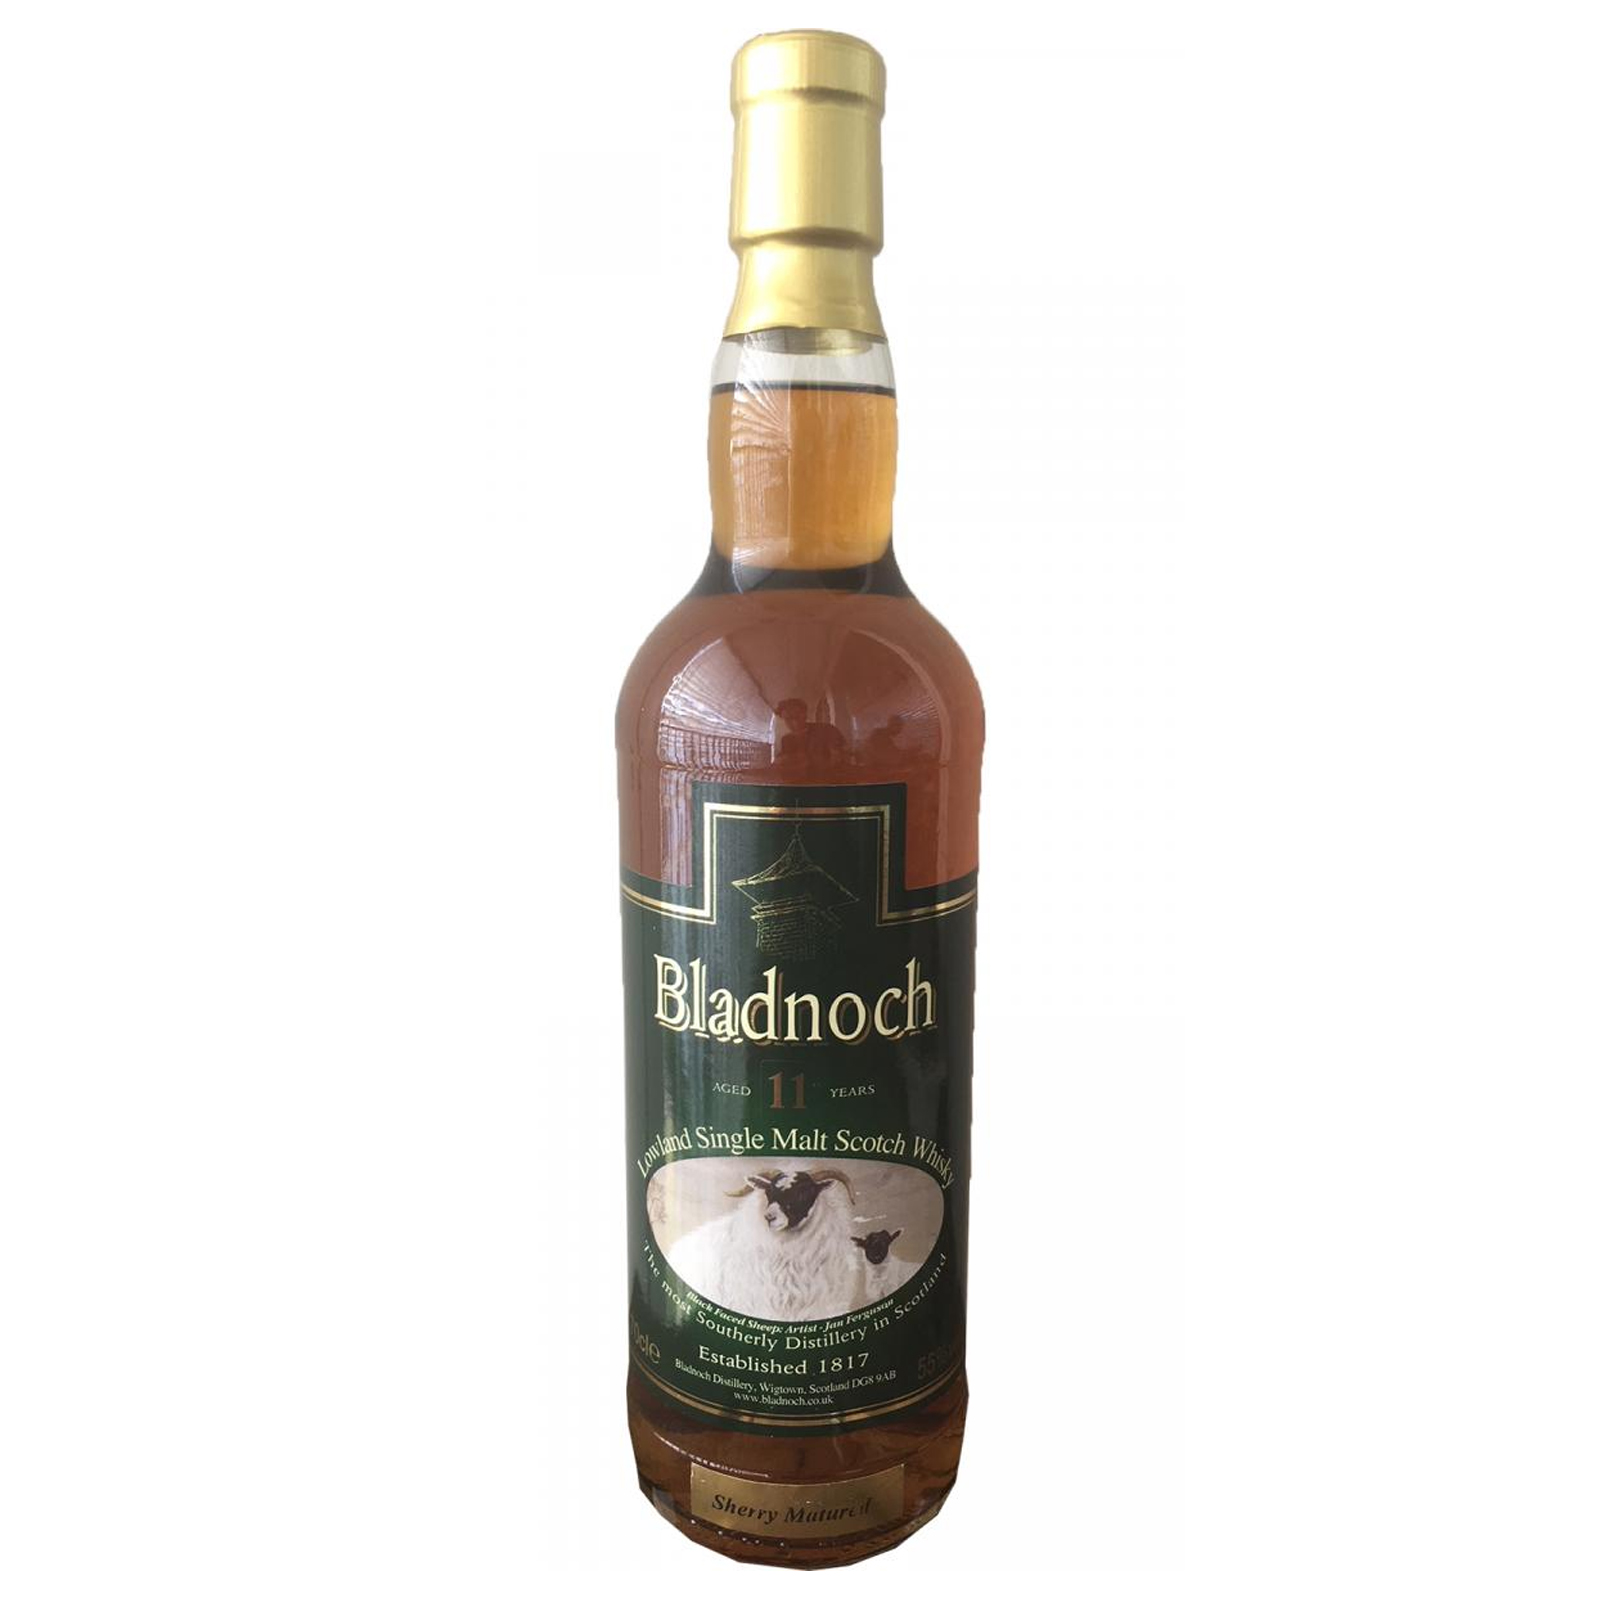 You are currently viewing Bladnoch 11 years